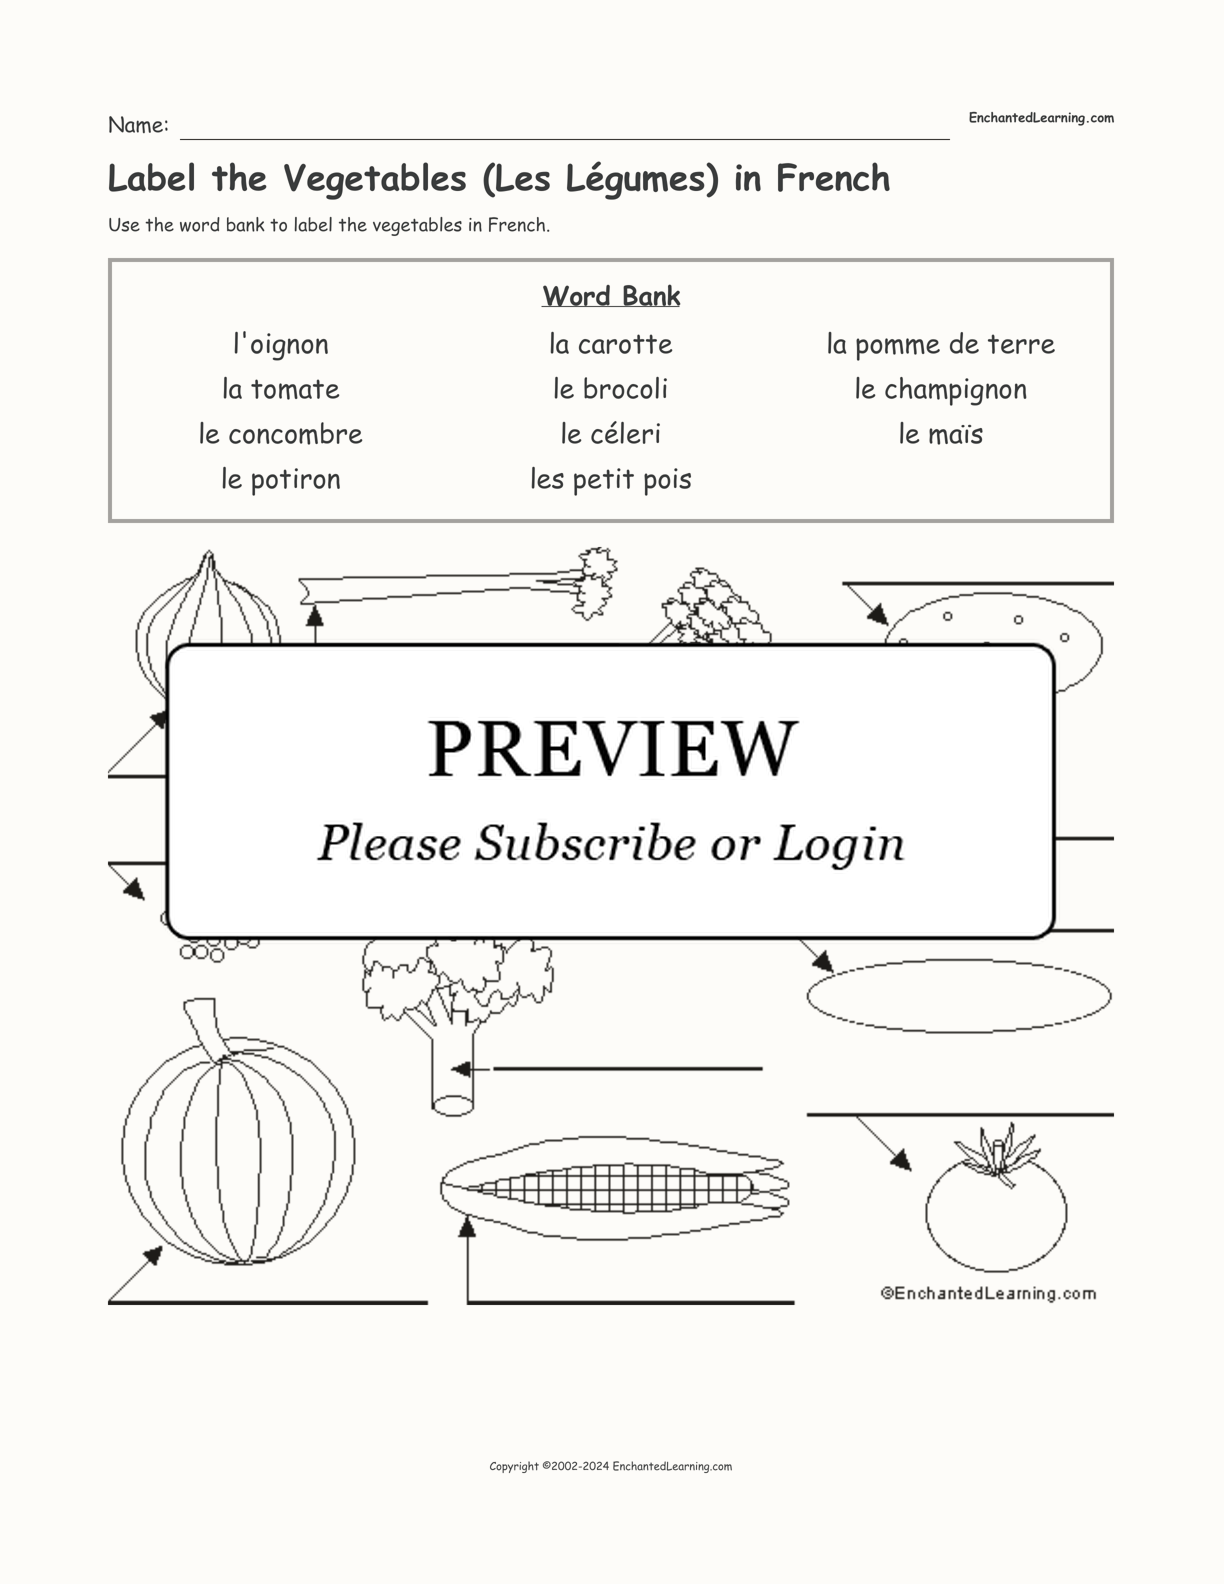 Label the Vegetables (Les Légumes) in French interactive worksheet page 1